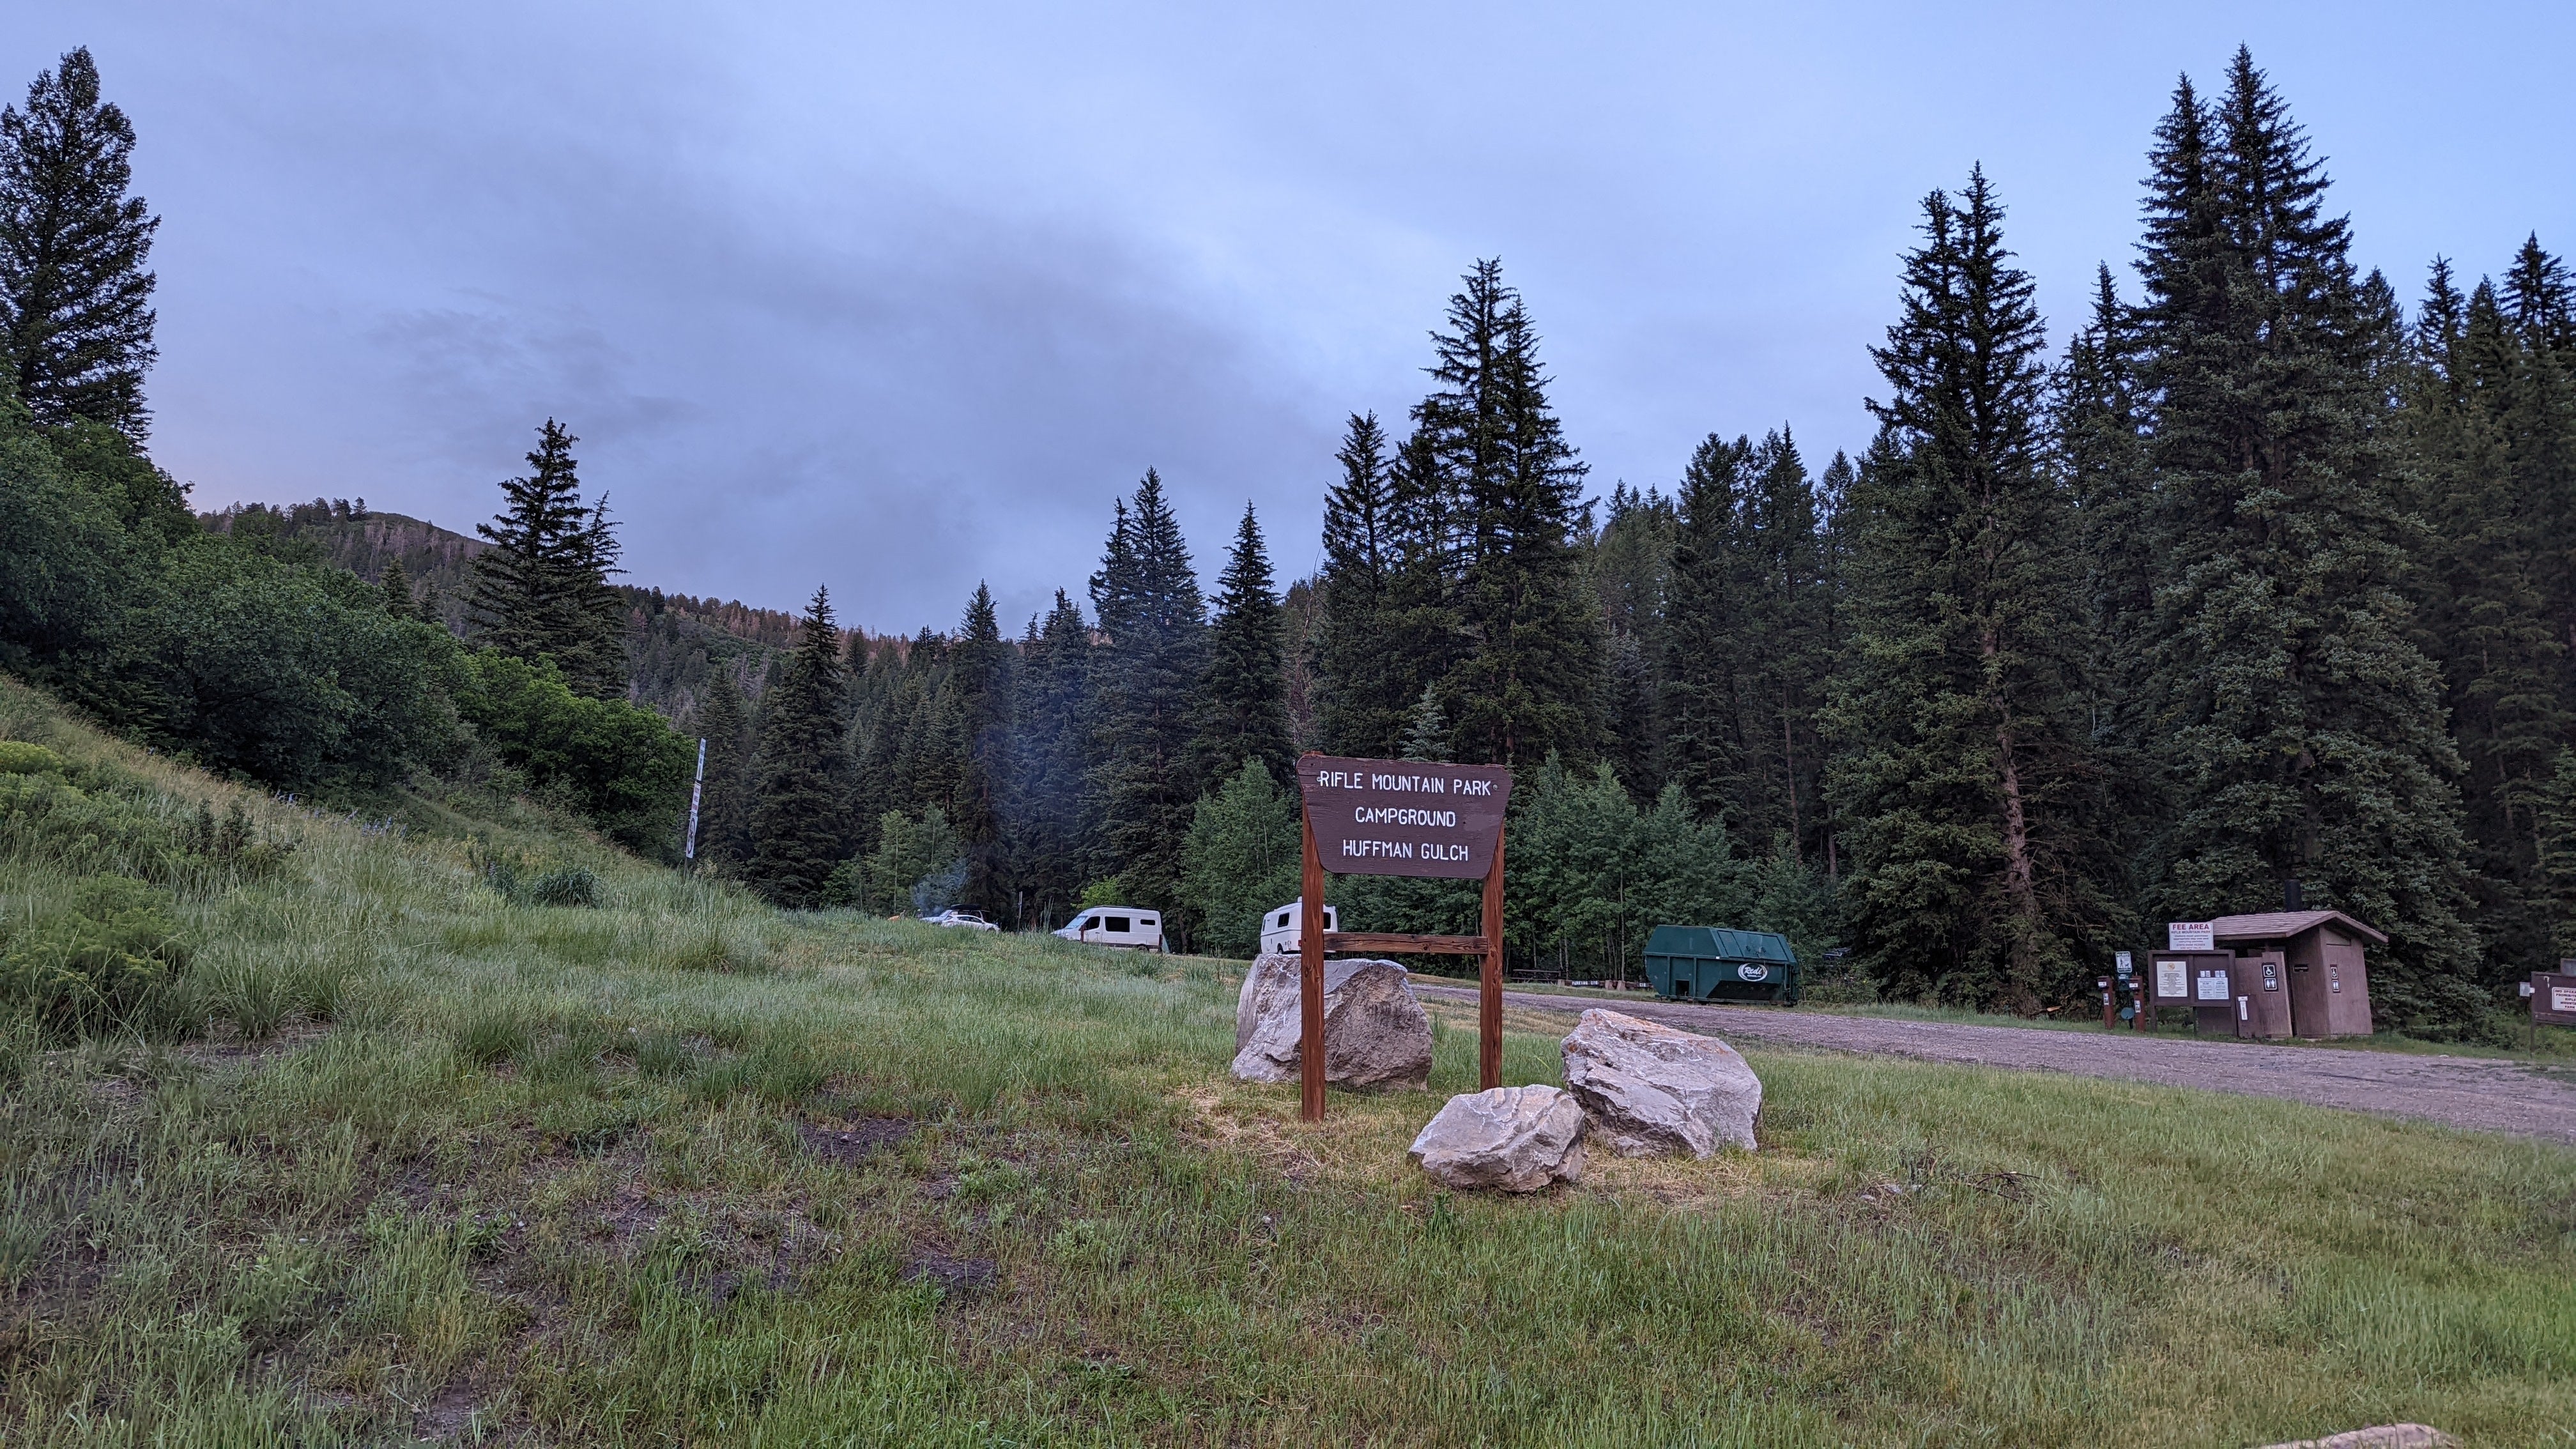 Camper submitted image from Rifle Mountain Park- Sawmill Gulch - 1